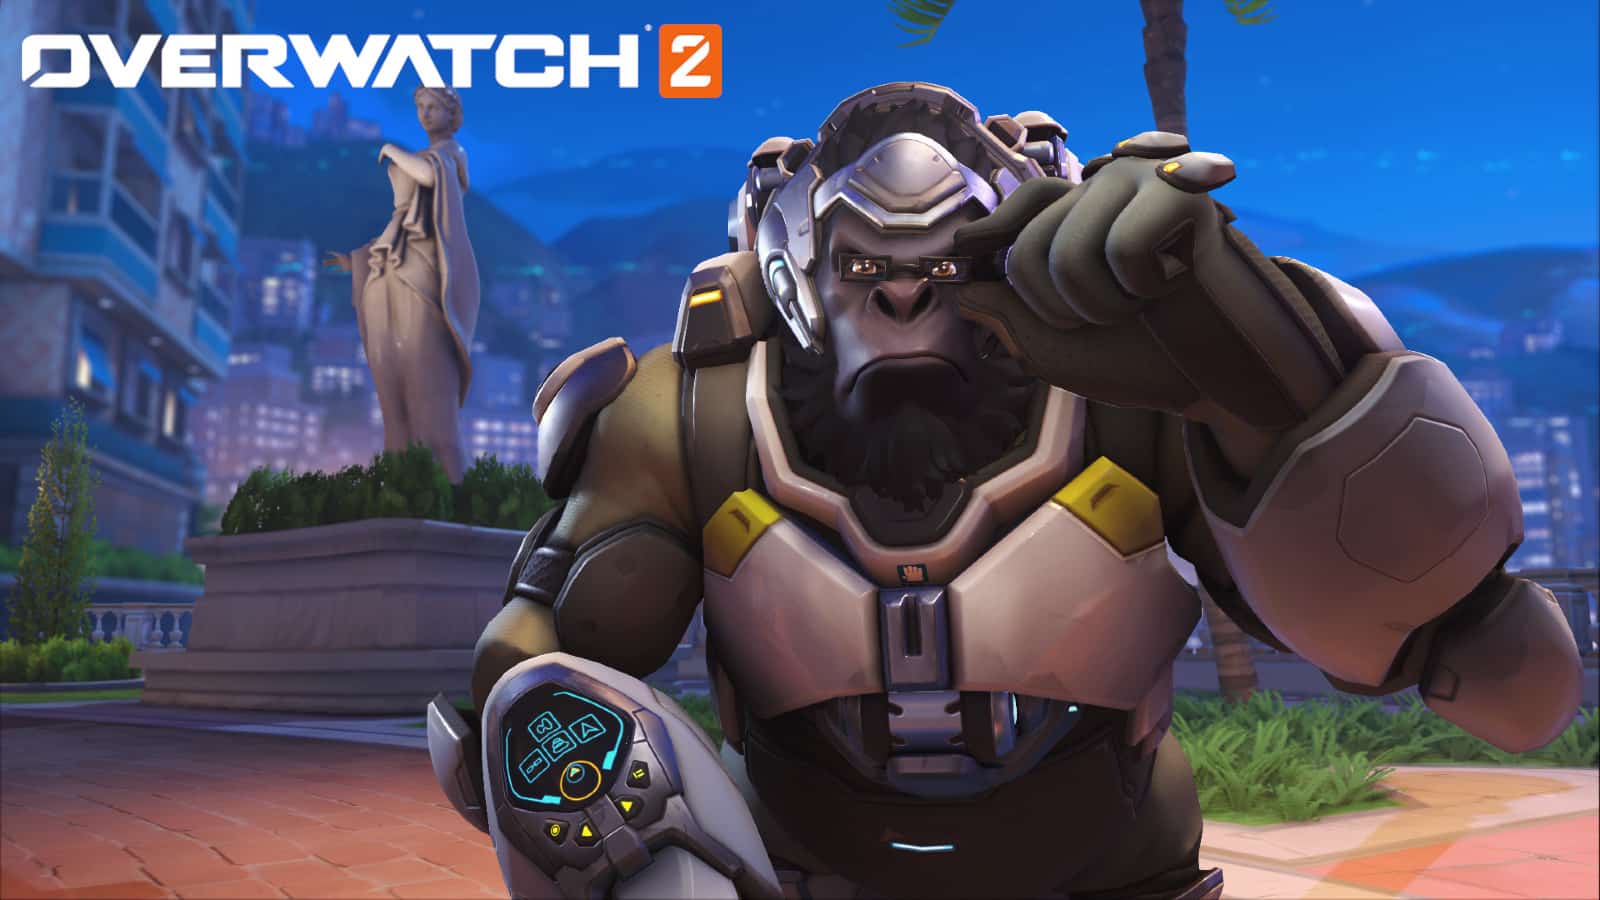 Overwatch 2 anti-cheat features